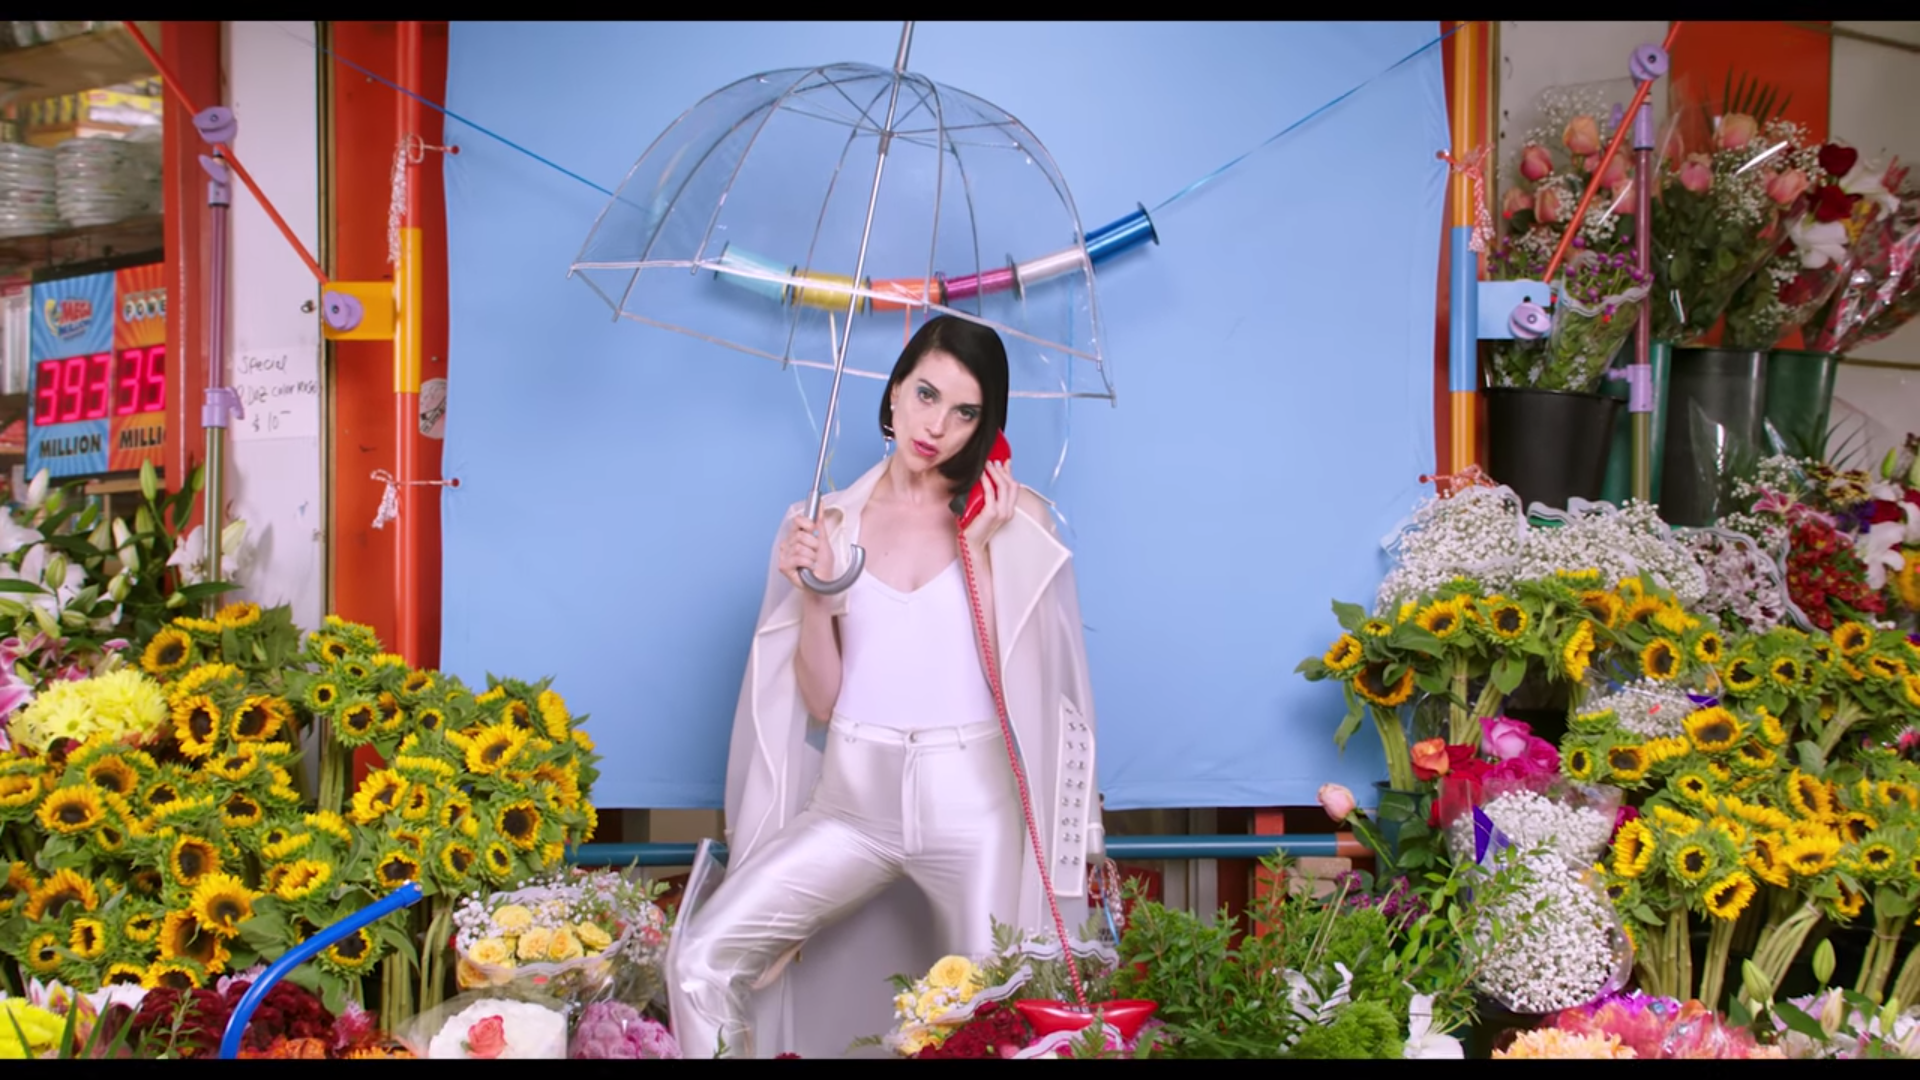 Watch St. Vincent's Colorful New Video For Power Ballad "New York"